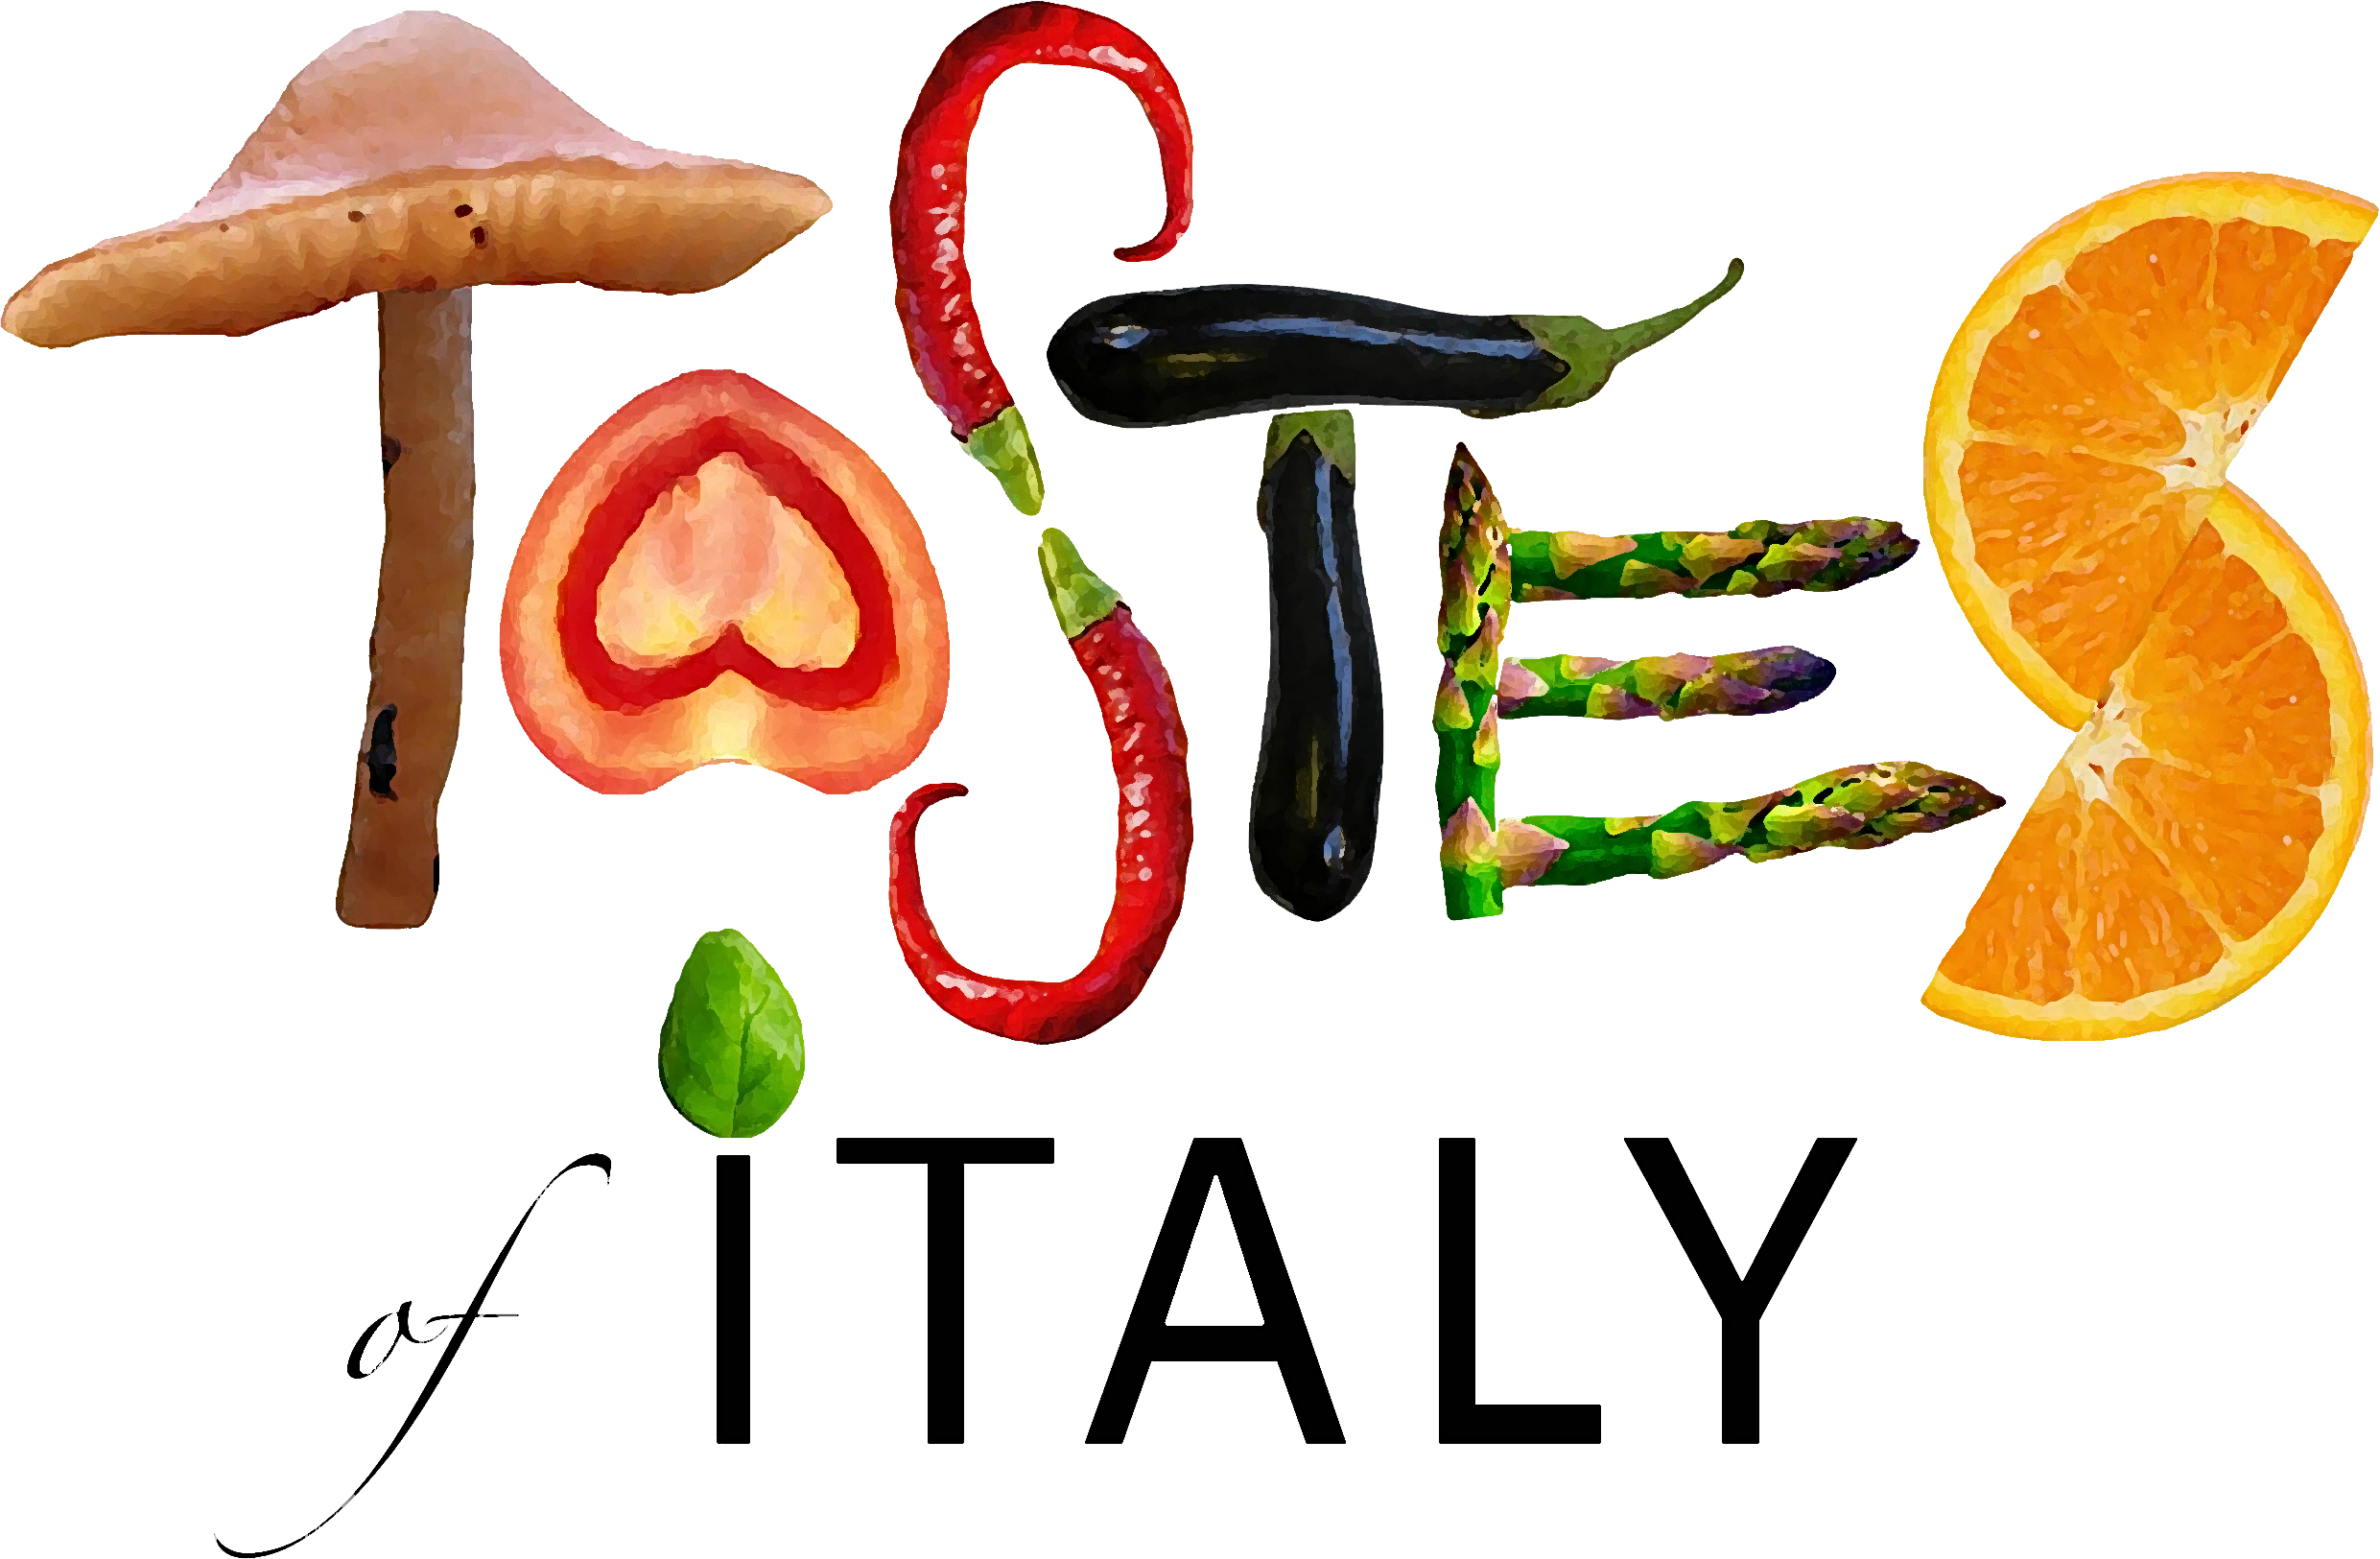 Tastes Of Italy March 10 At The Italian Cultural Institute